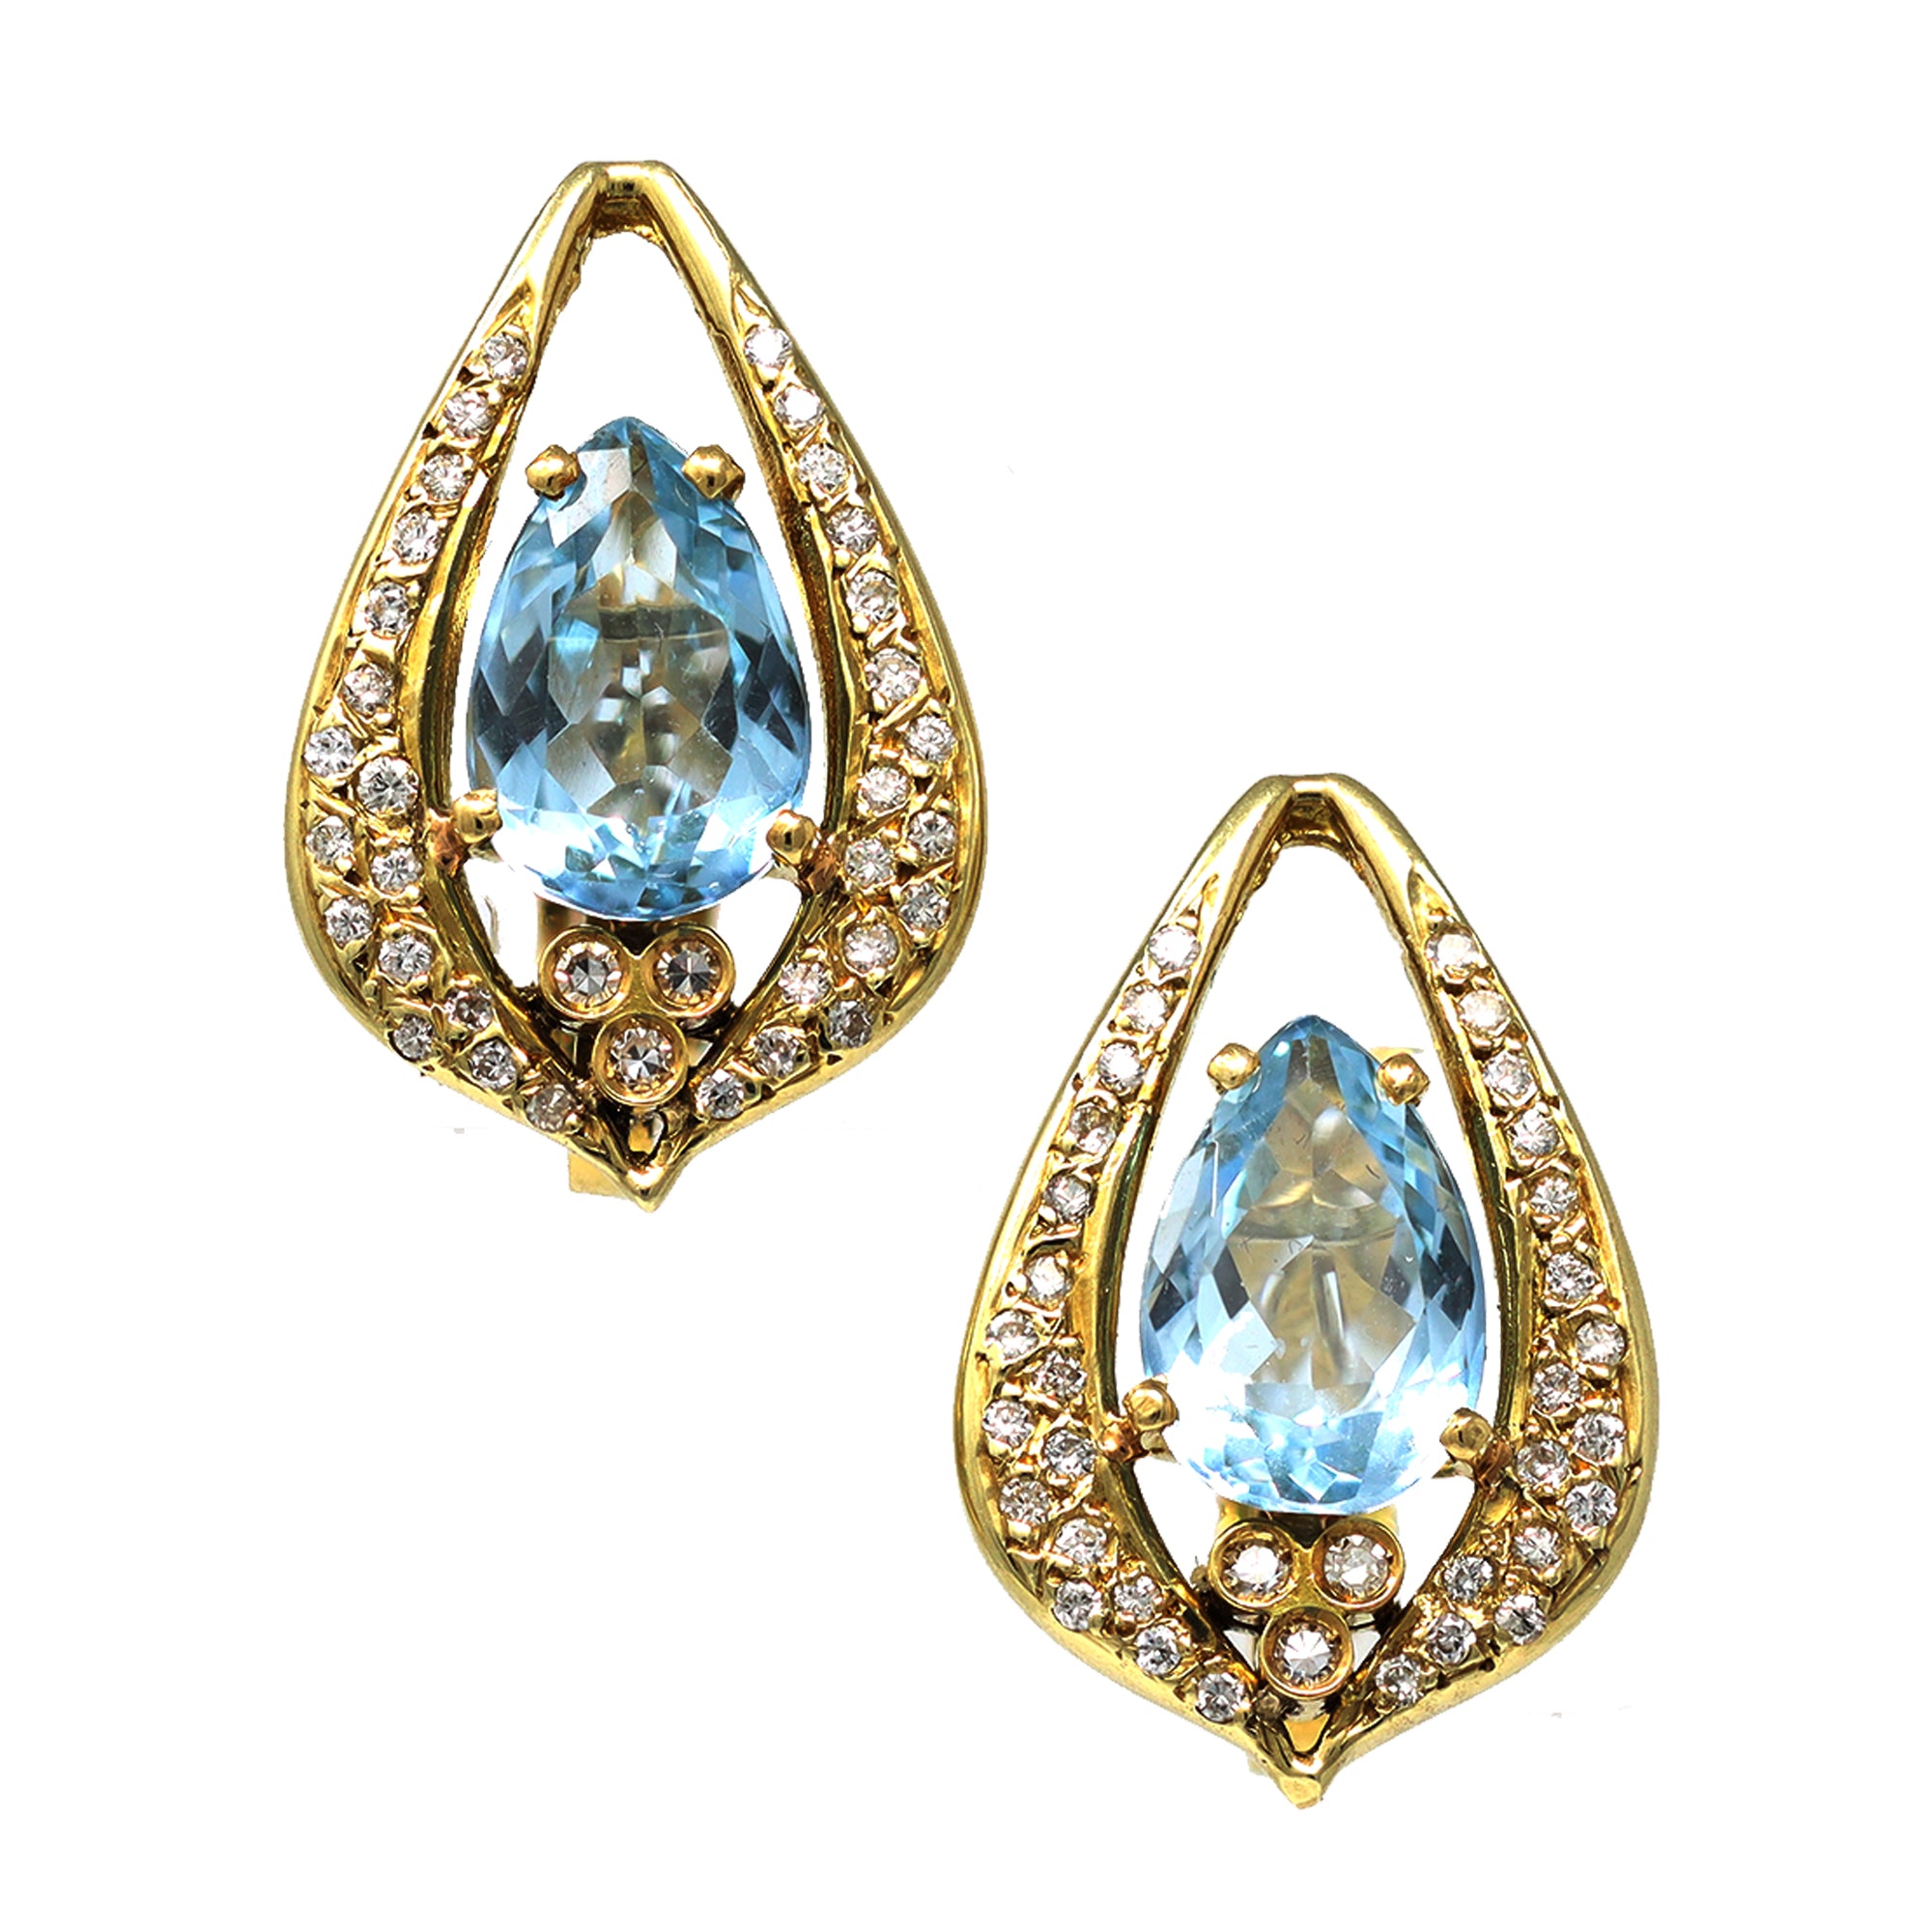 Aquamarine & Diamond Clip-on Earrings set in 18K Yellow Gold CA 1980 front view